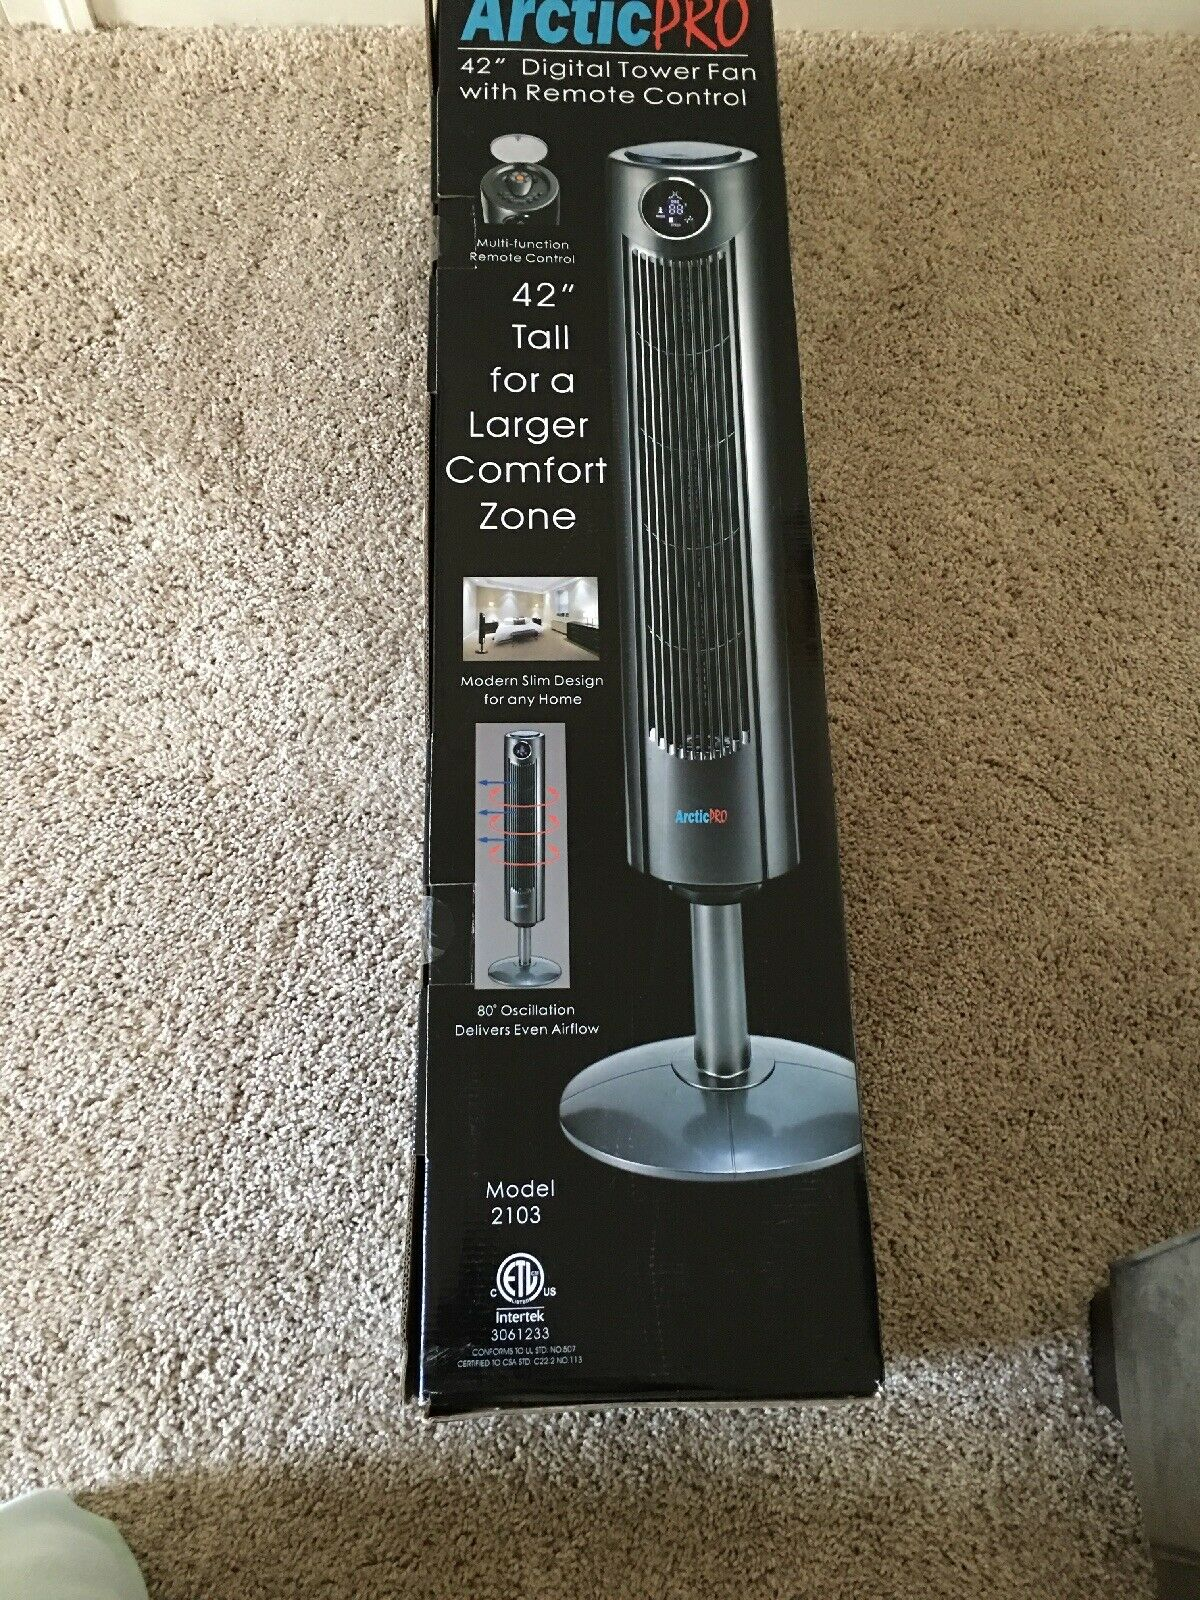 Arctic Pro Digital Screen Oscillating Tower Fan With Remote Control Dark Gray within size 1200 X 1600